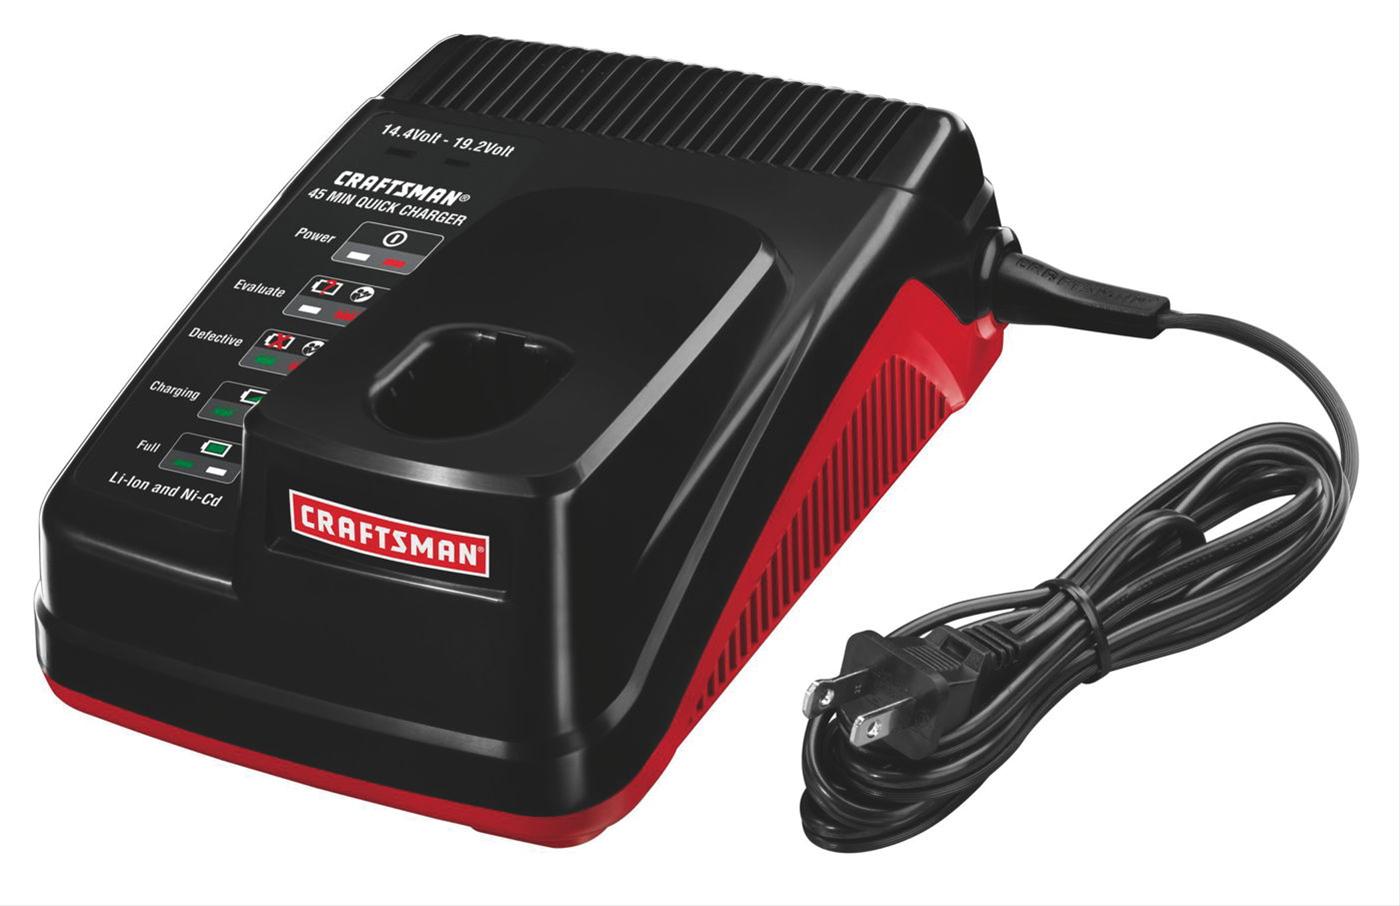 Craftsman C3 19.2 V Lithium-Ion Battery Chargers 009-25926 - Free Craftsman 19.2 Volt Battery Charger Problems